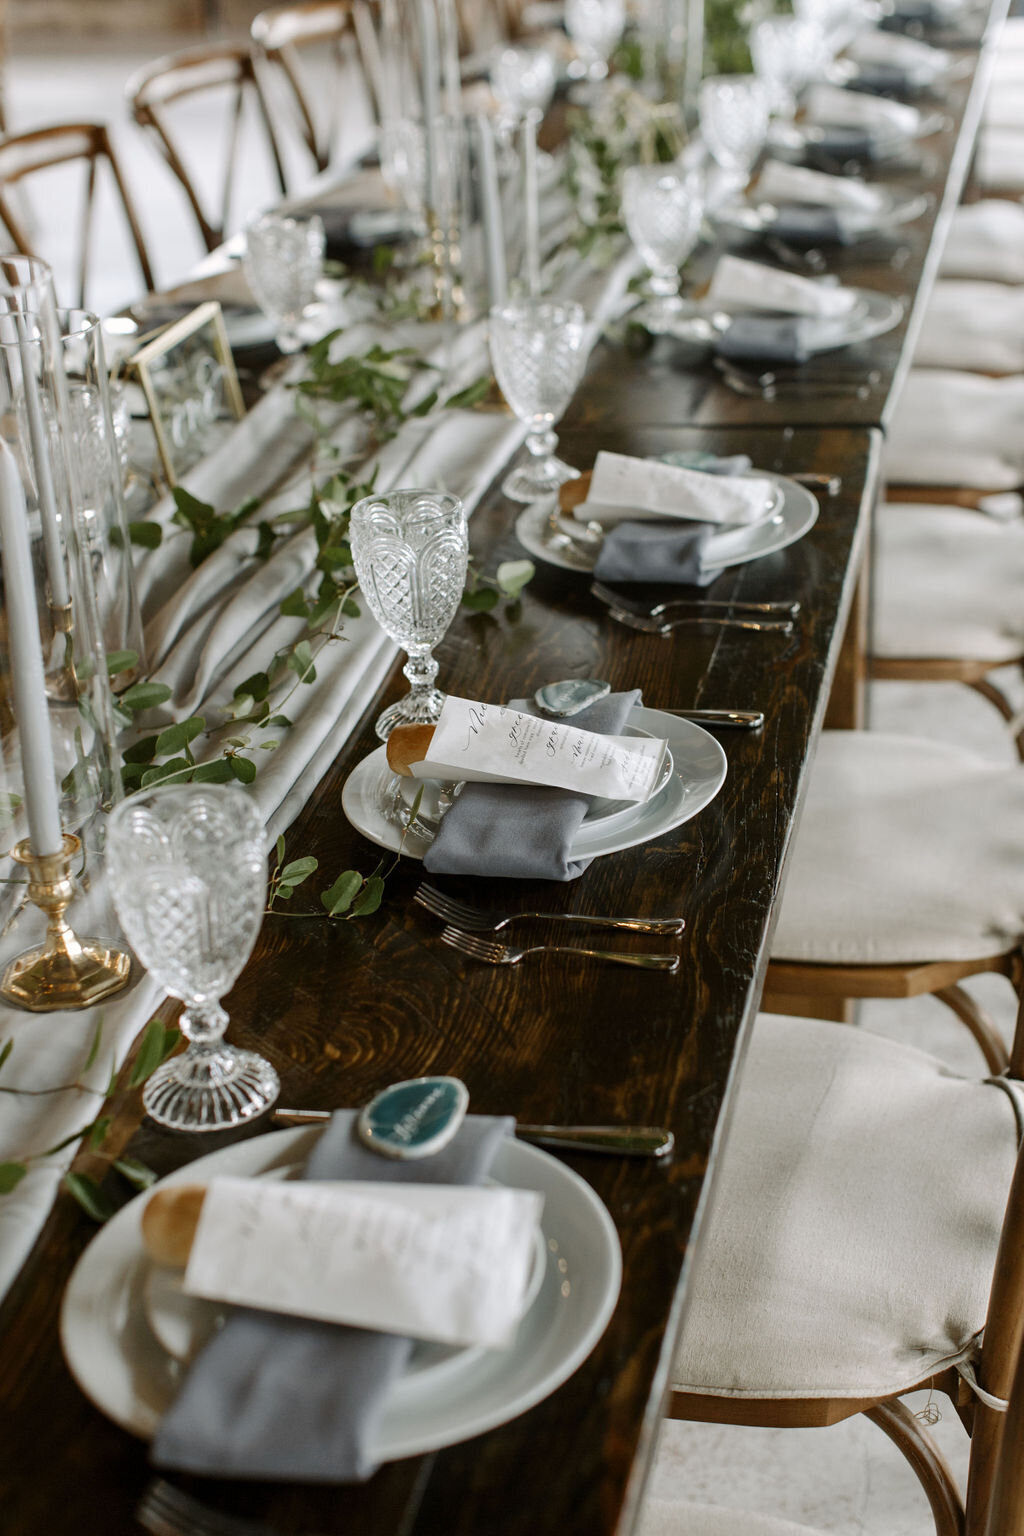 Wedding reception table scape with gray napkins and greenery